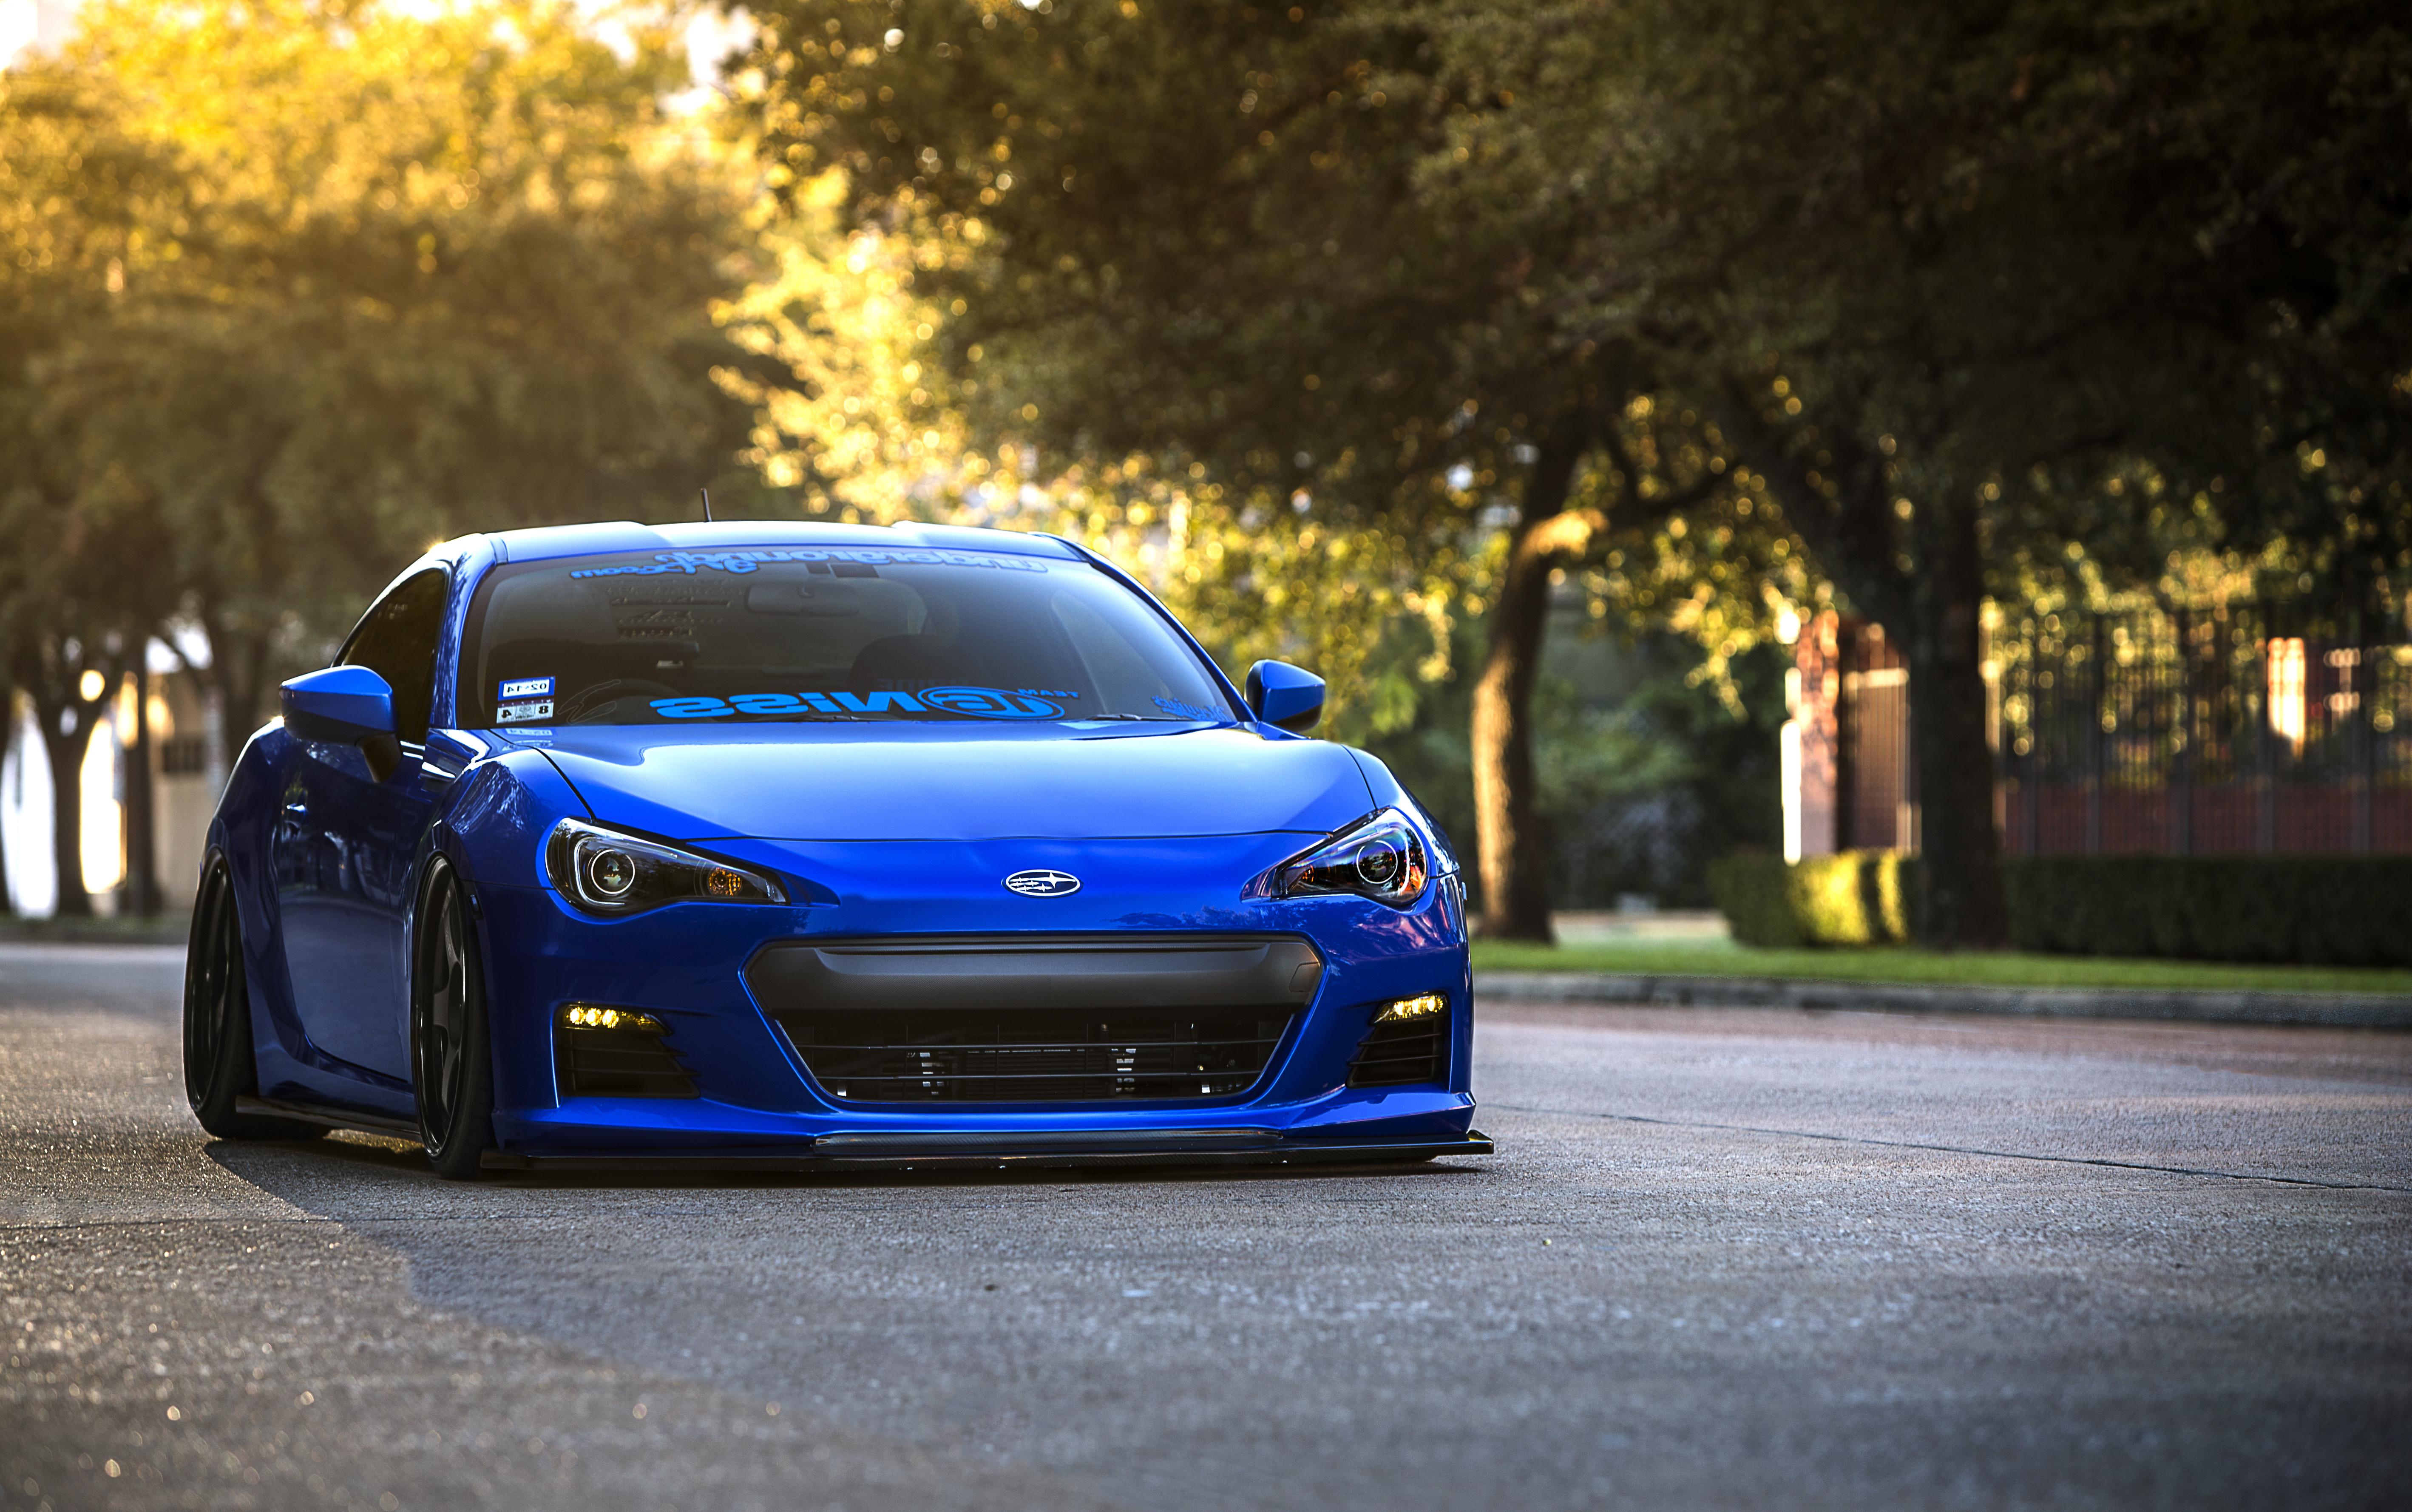 Subaru Brz Blue Front Sports Car Coupe Wallpaperbest Of The Best High